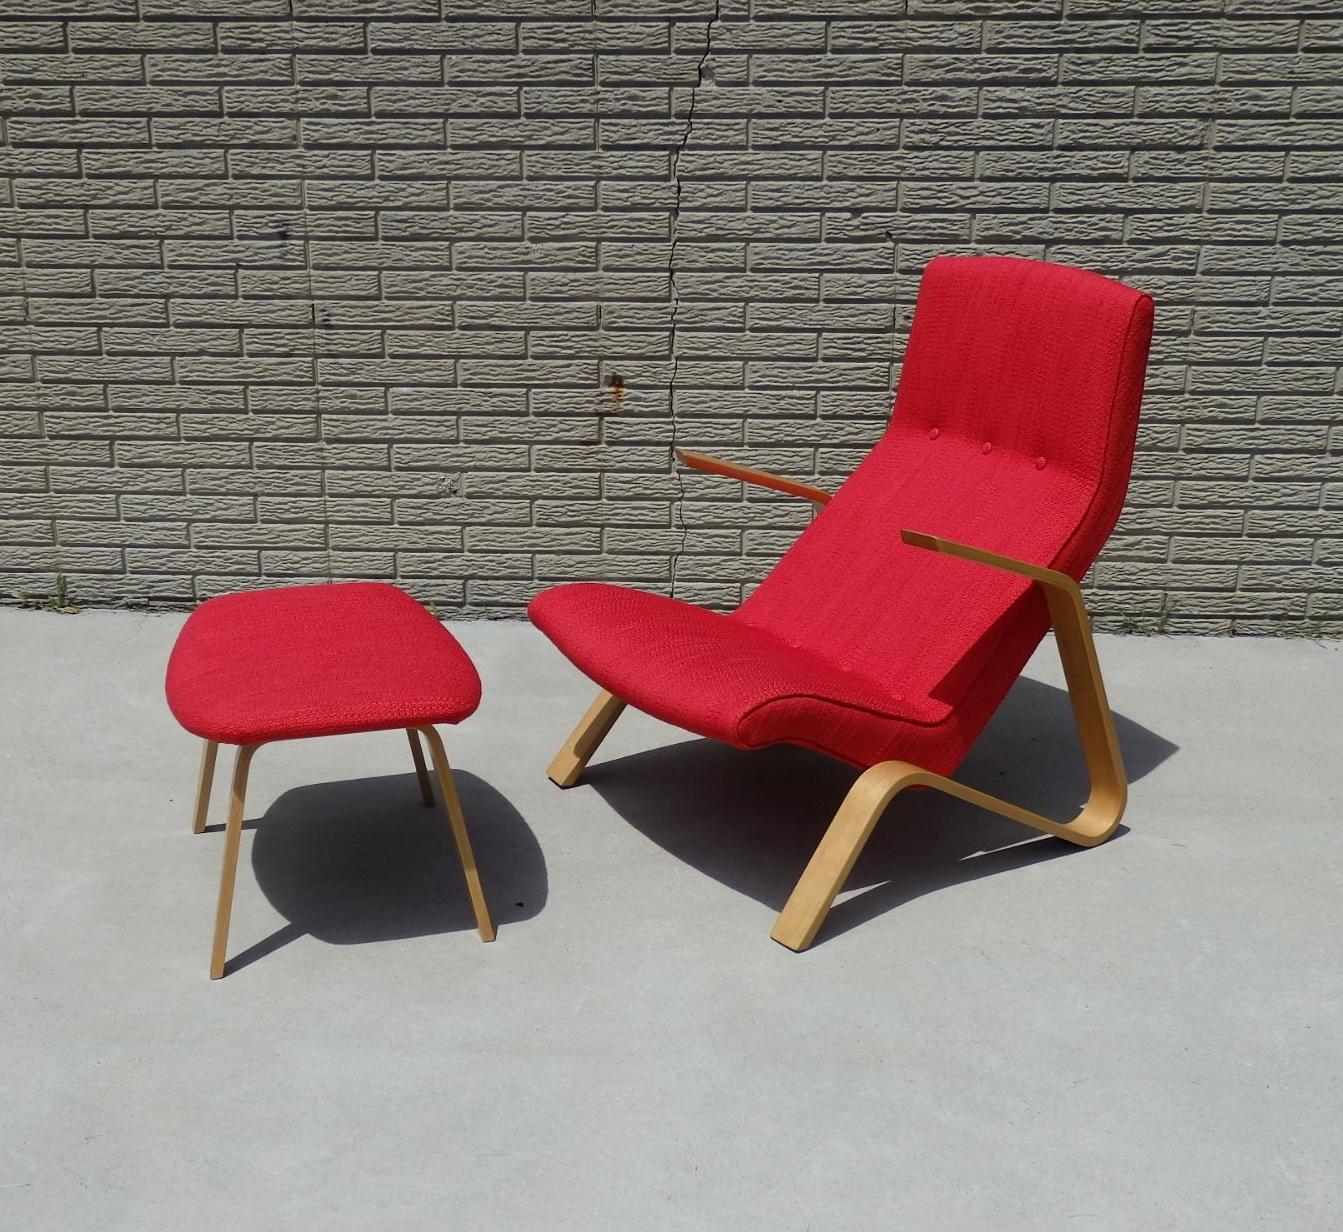 Mid-20th Century Early Eero Saarinen for HG Knoll Grasshopper Chair in Scarlet Rivington Textile